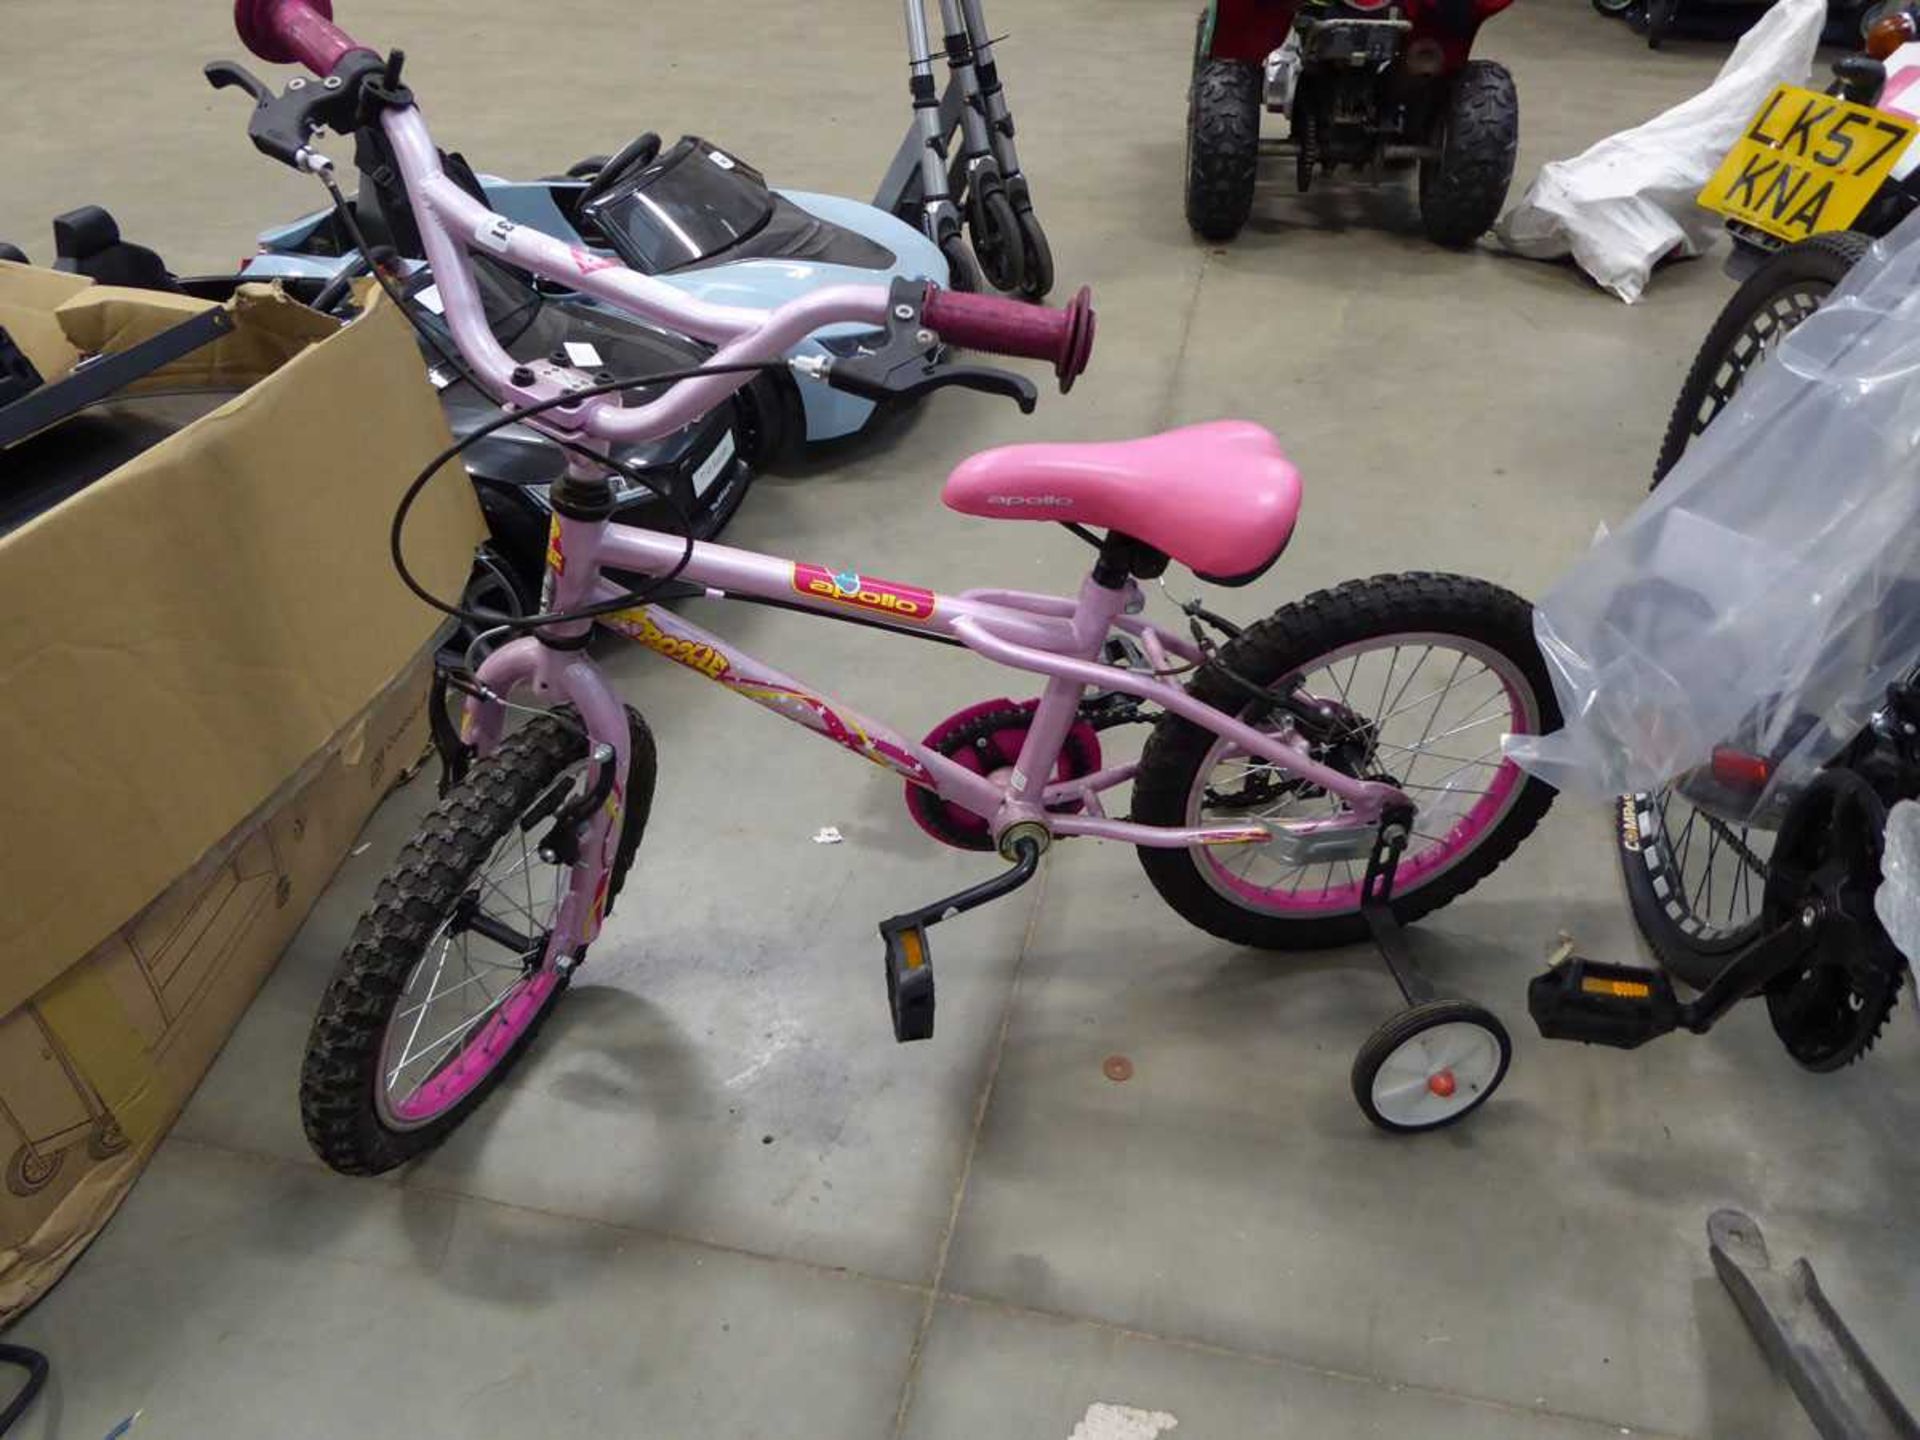 Small child's pink bike with stabilisers